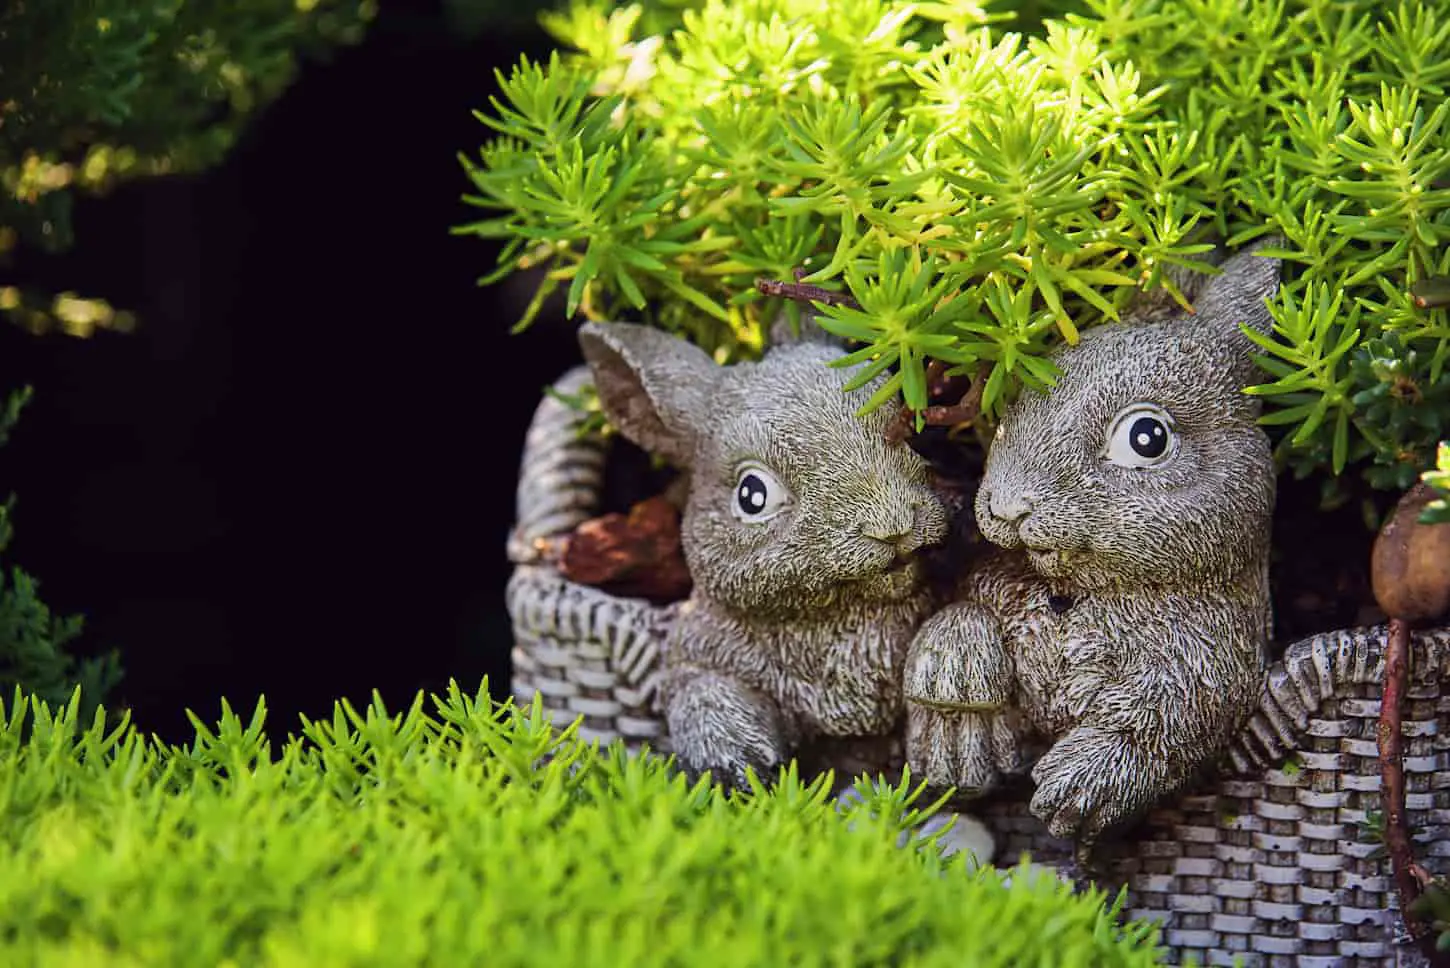 An image of lover rabbits garden statues with green leaves.